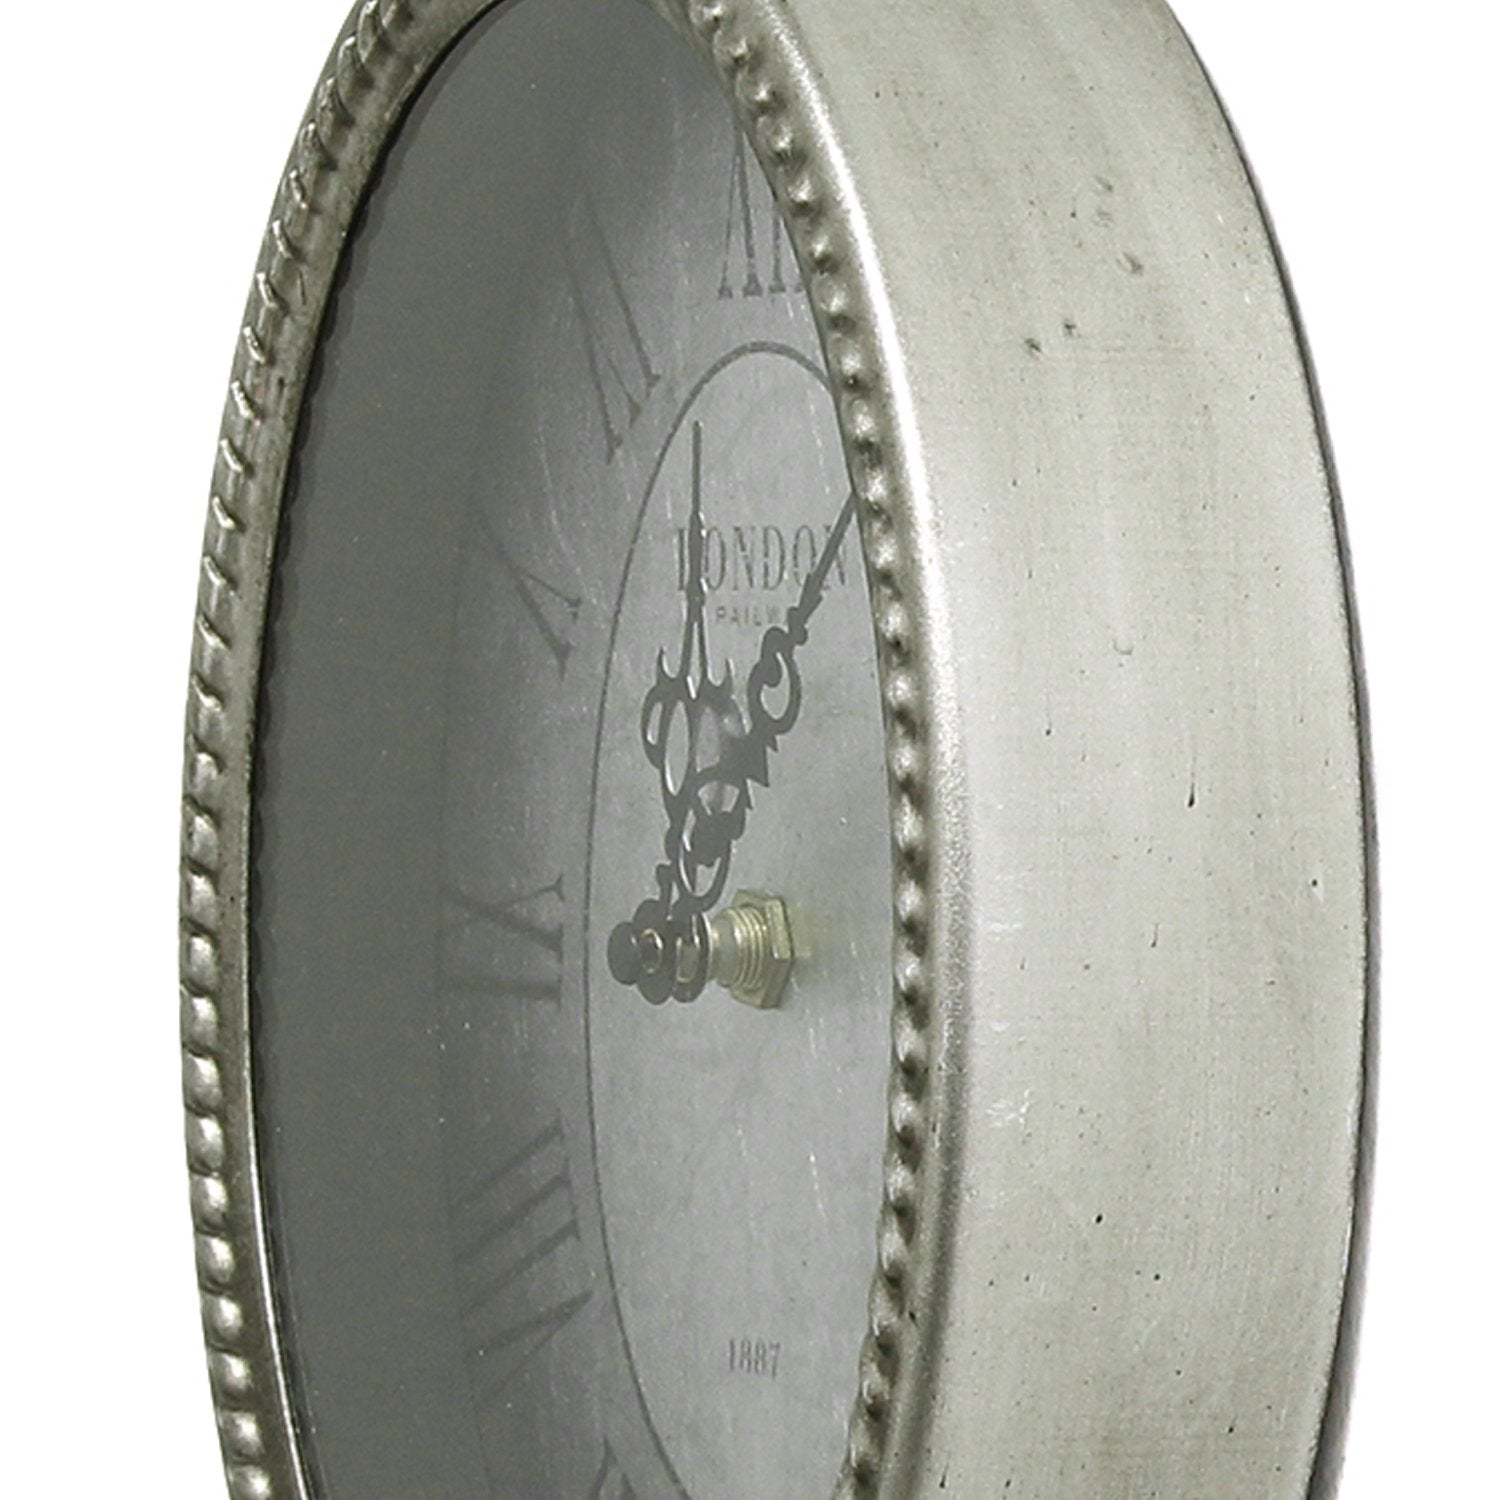 Oval Vintage Wall Clock with Metal Shape - 11.75"